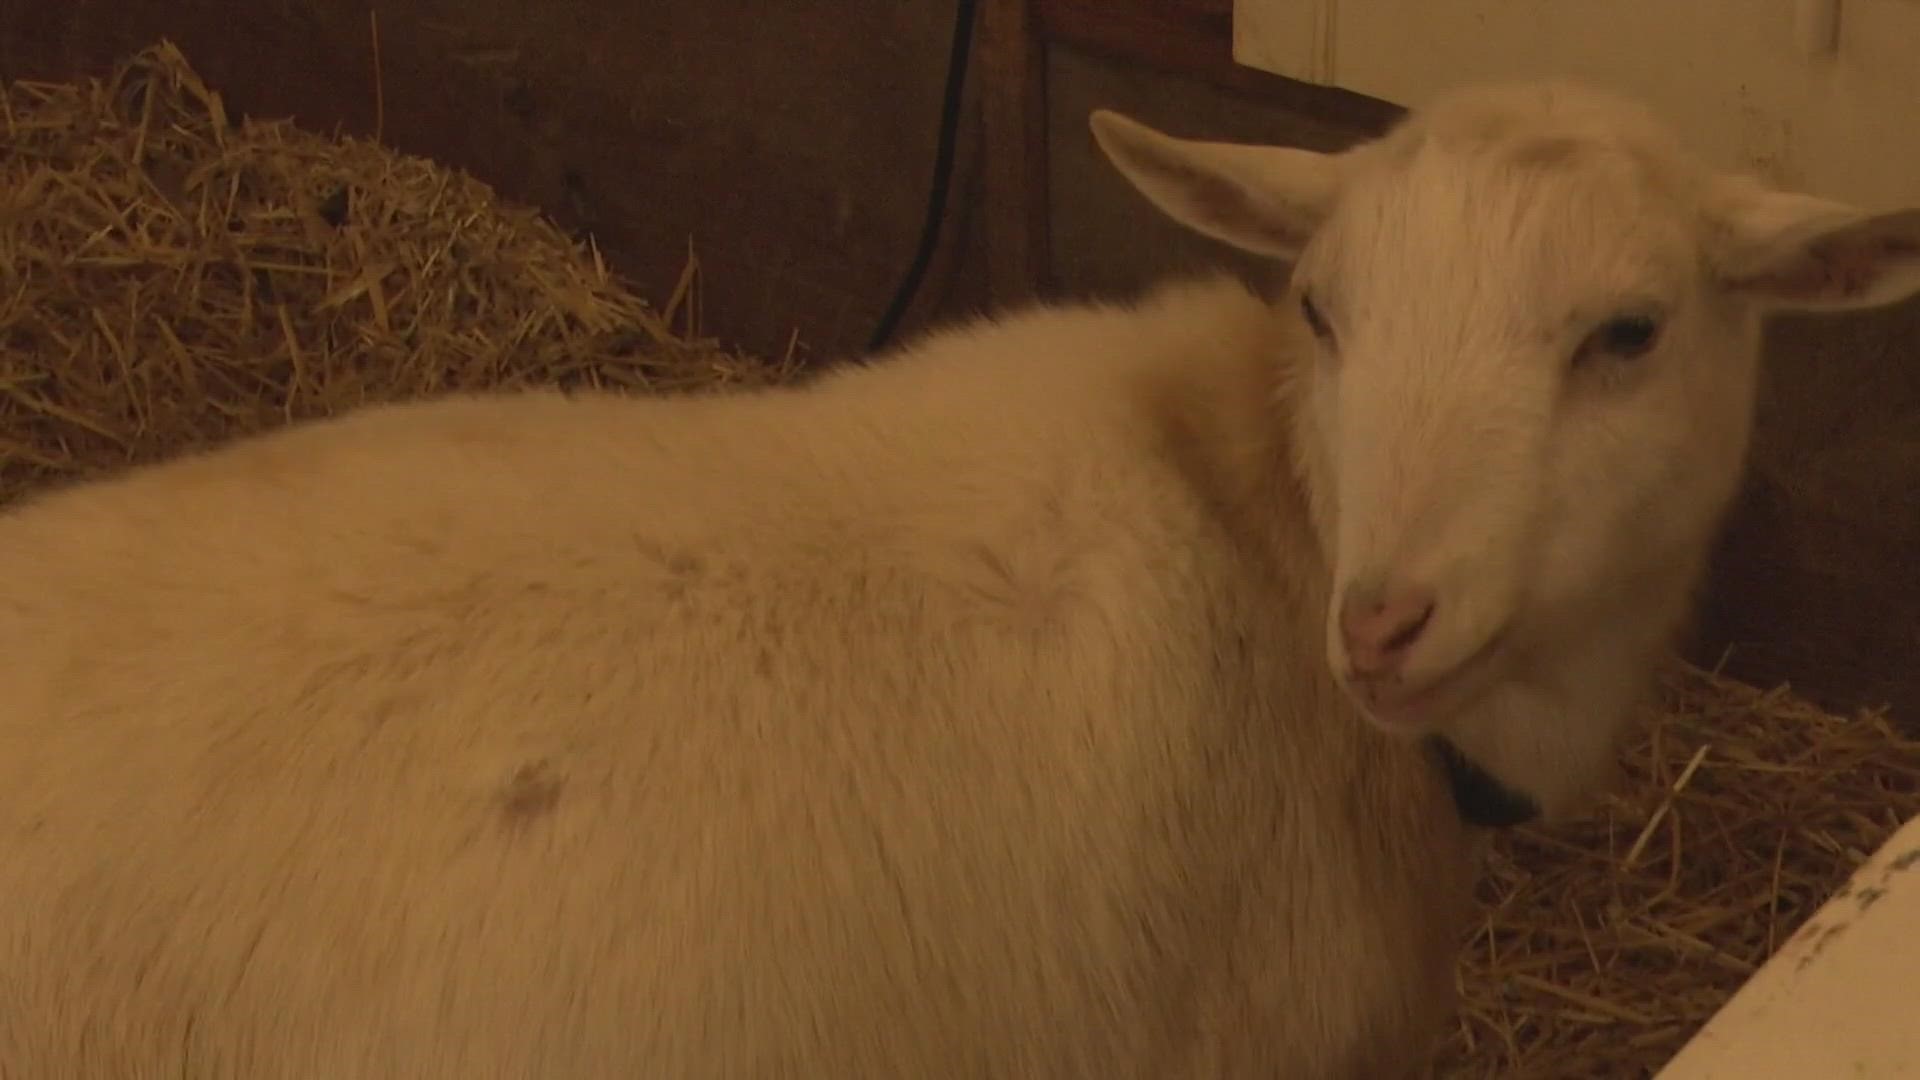 Goat grams are now a hot commodity, according to a North Carolina farmer.